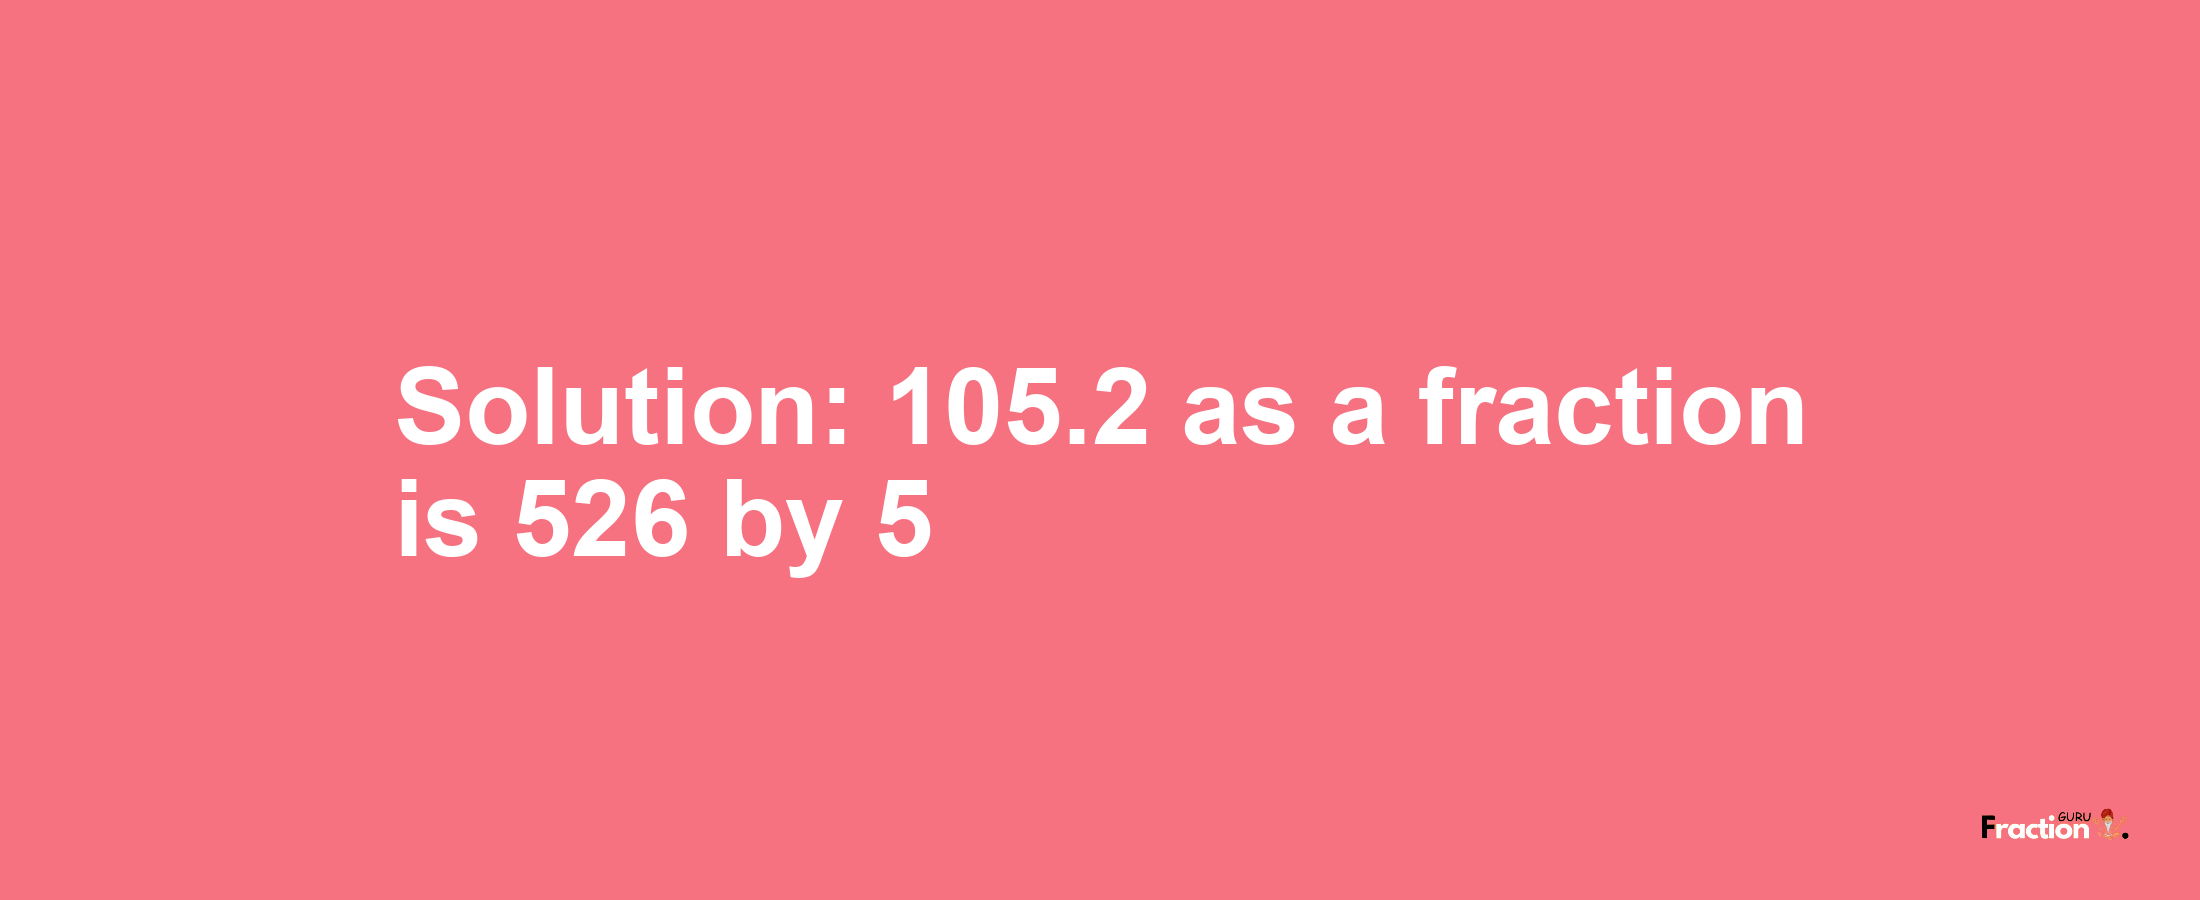 Solution:105.2 as a fraction is 526/5